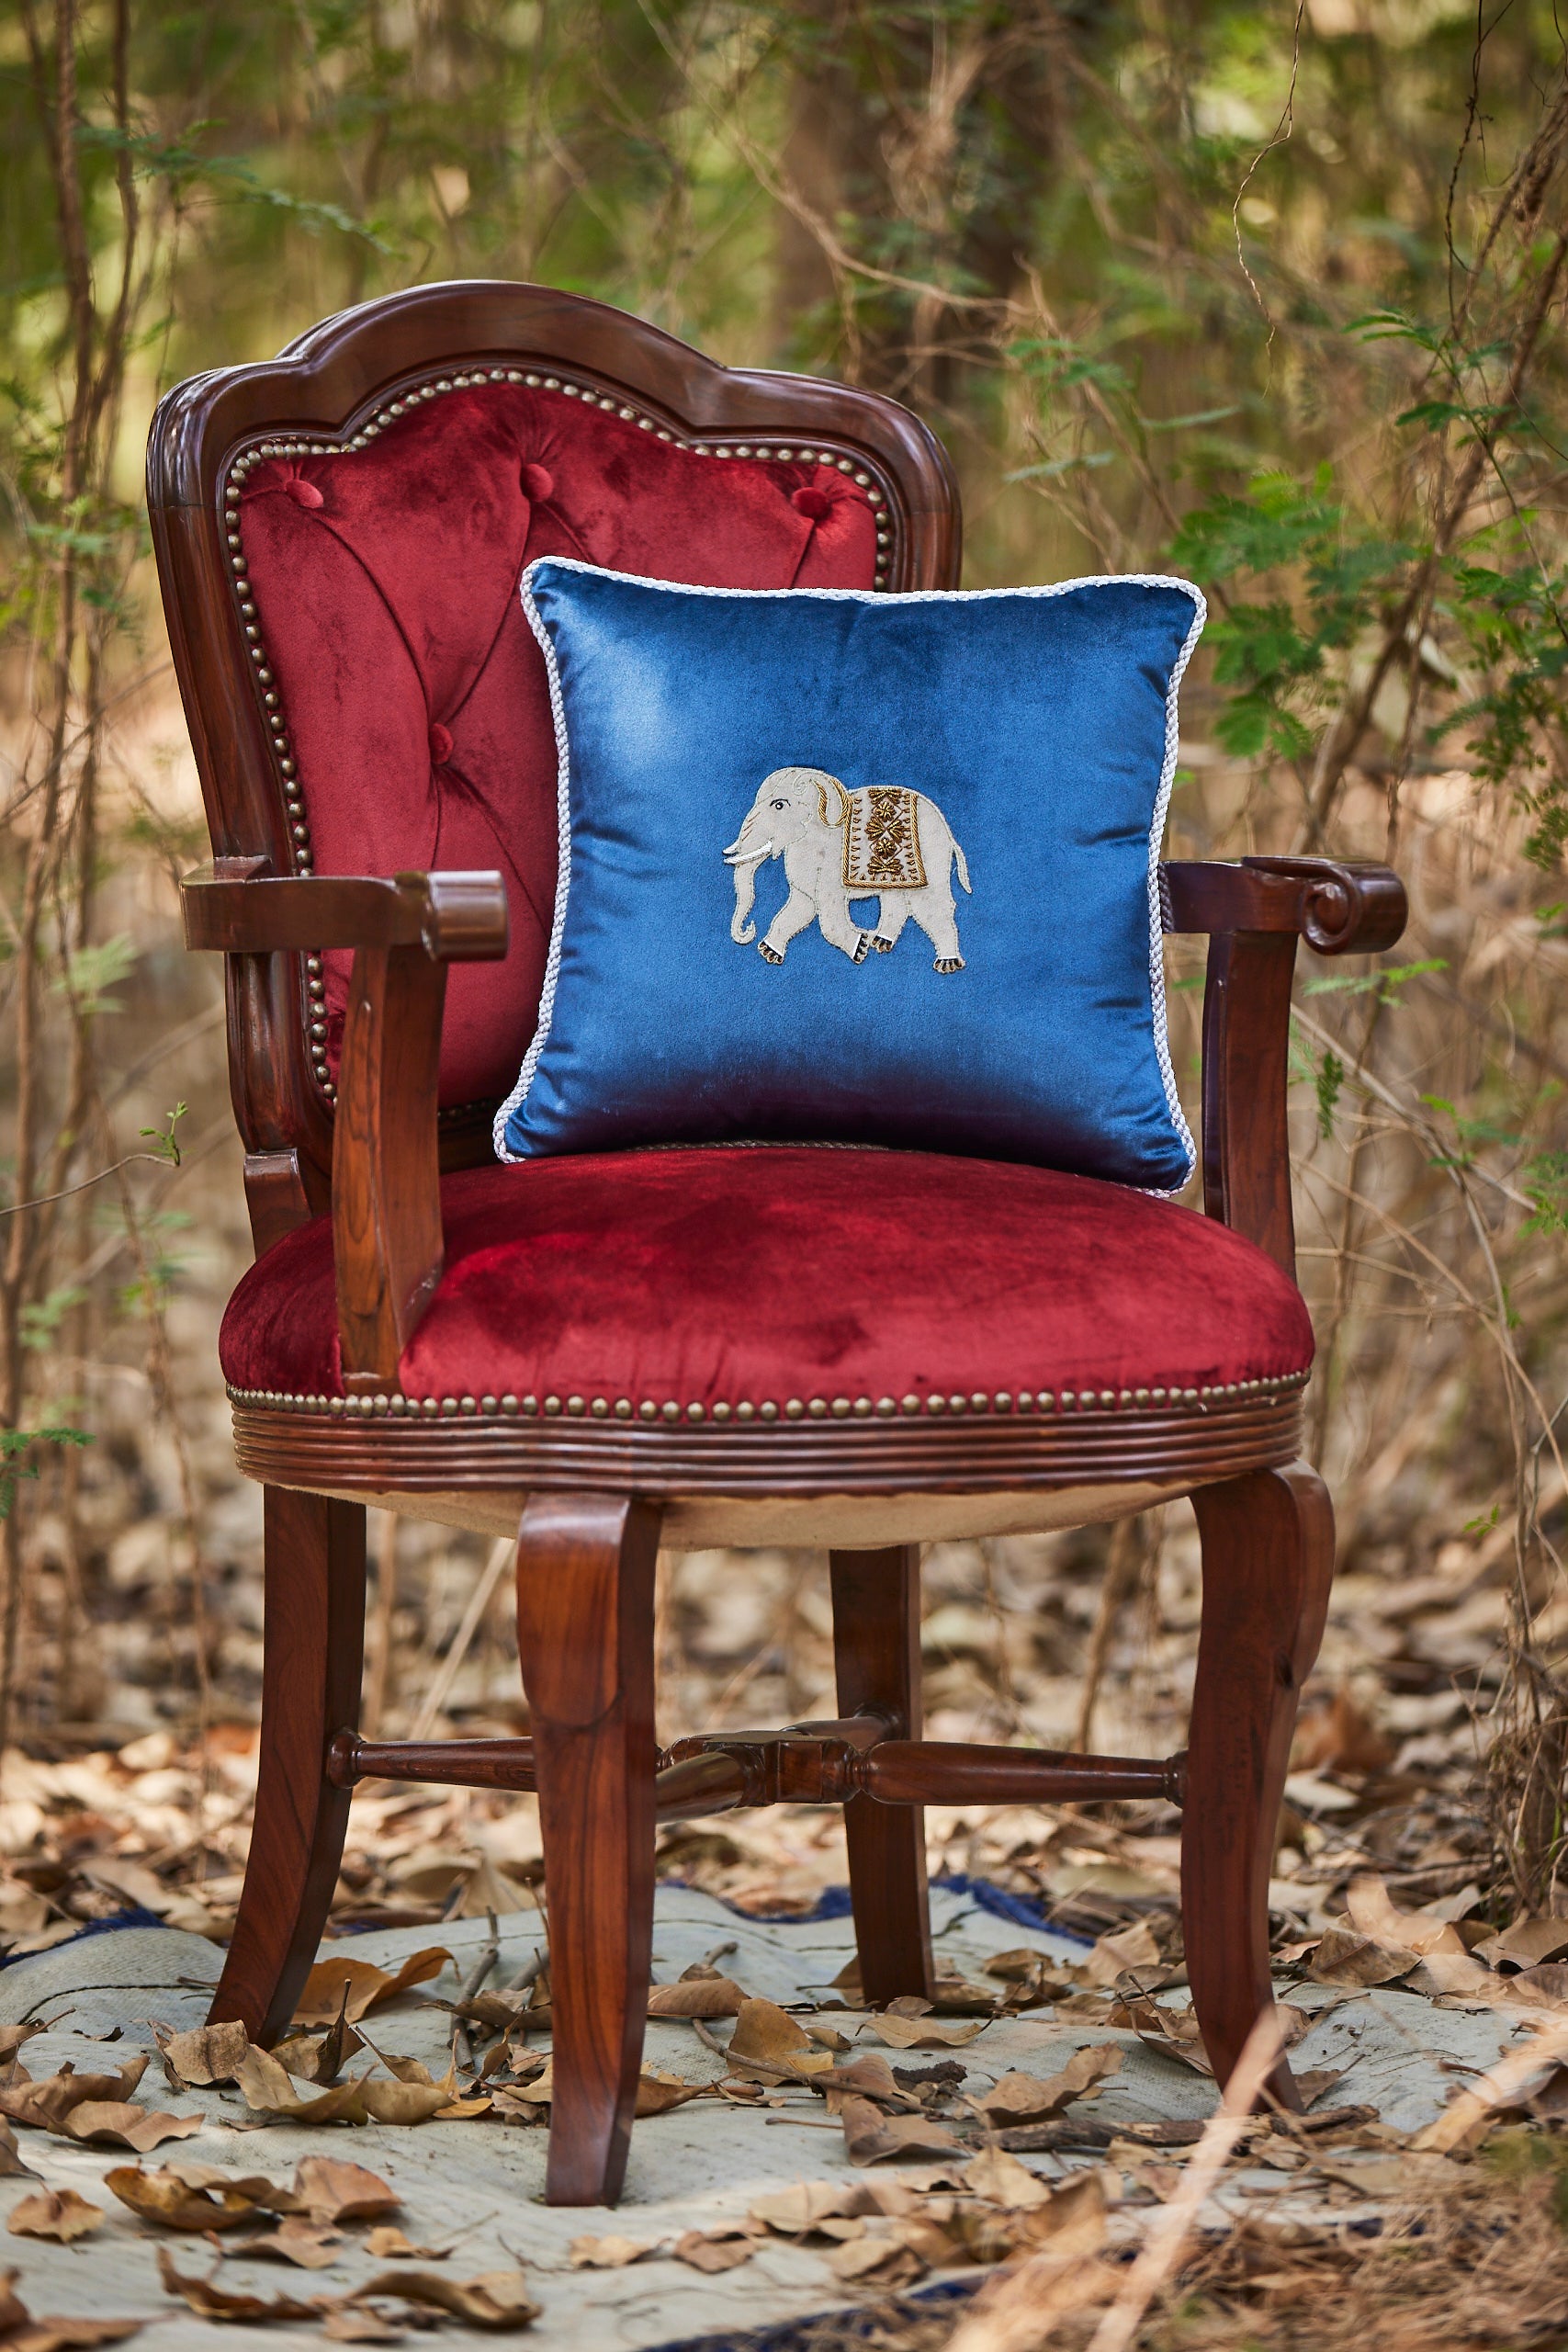 Tusker Embroidered Cushion